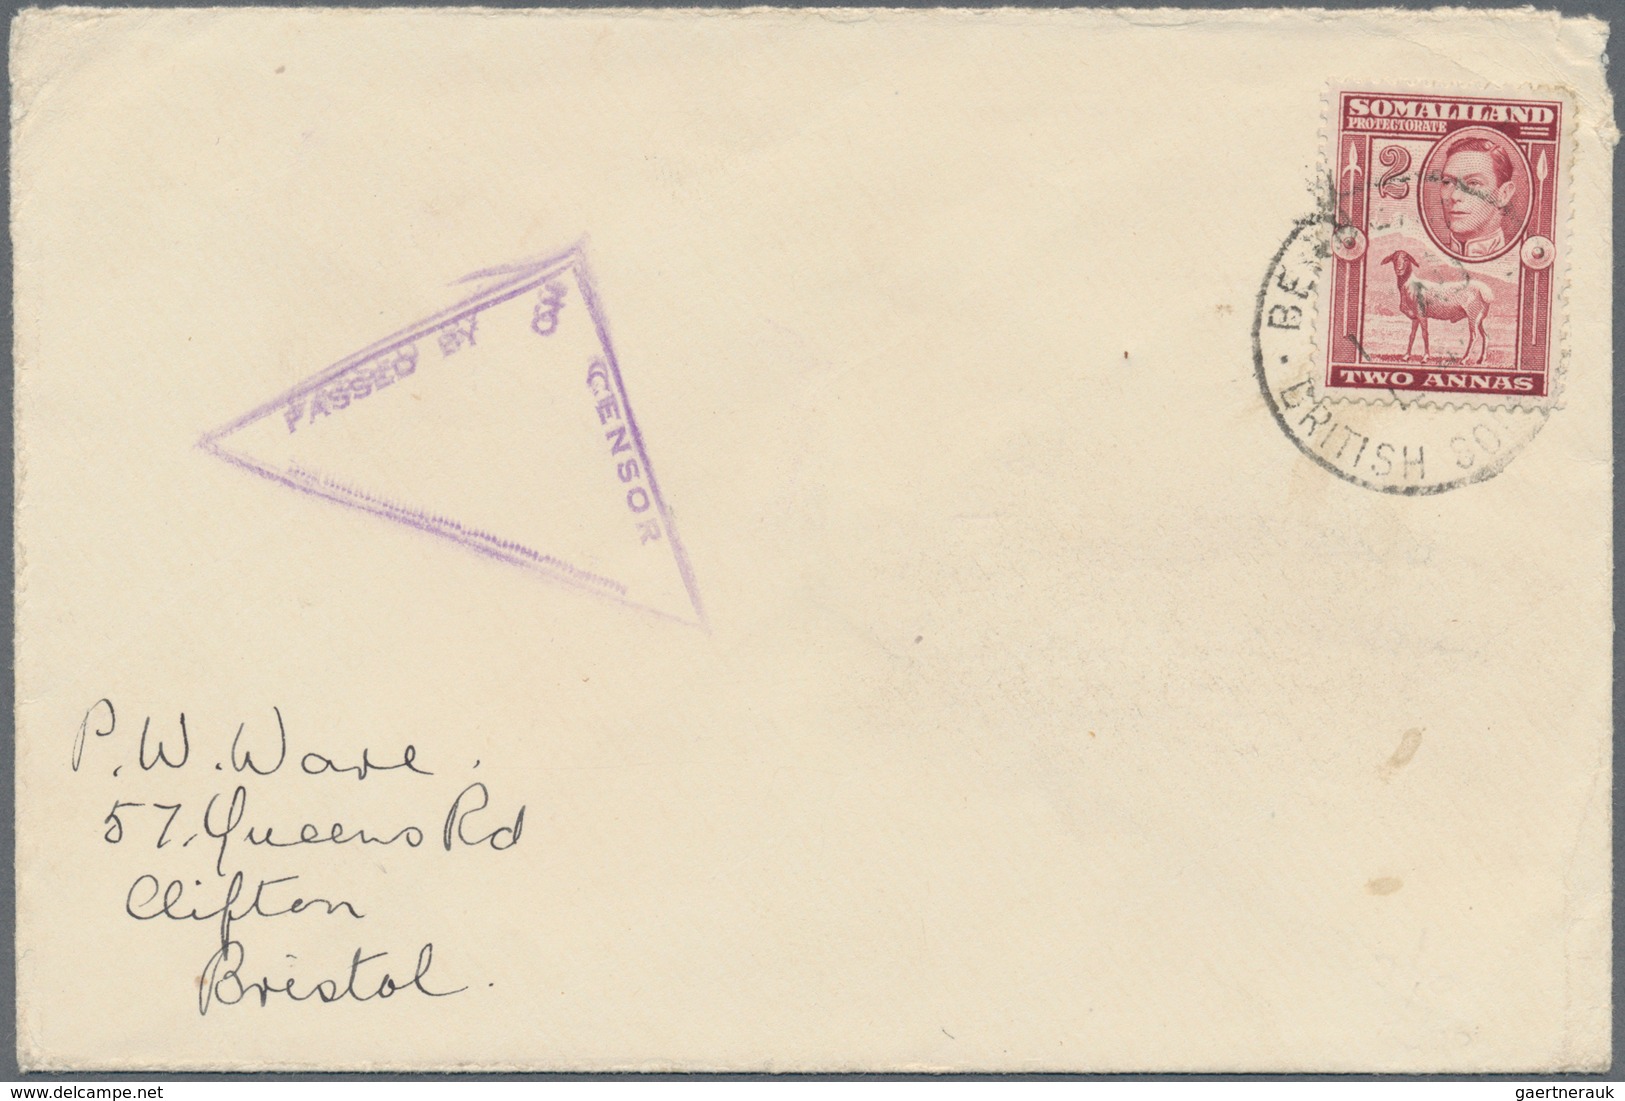 Britisch-Somaliland: 1940 Censored Cover From Berbera To Bristol Franked By 1938 2a. Maroon Tied By - Somalie (1960-...)